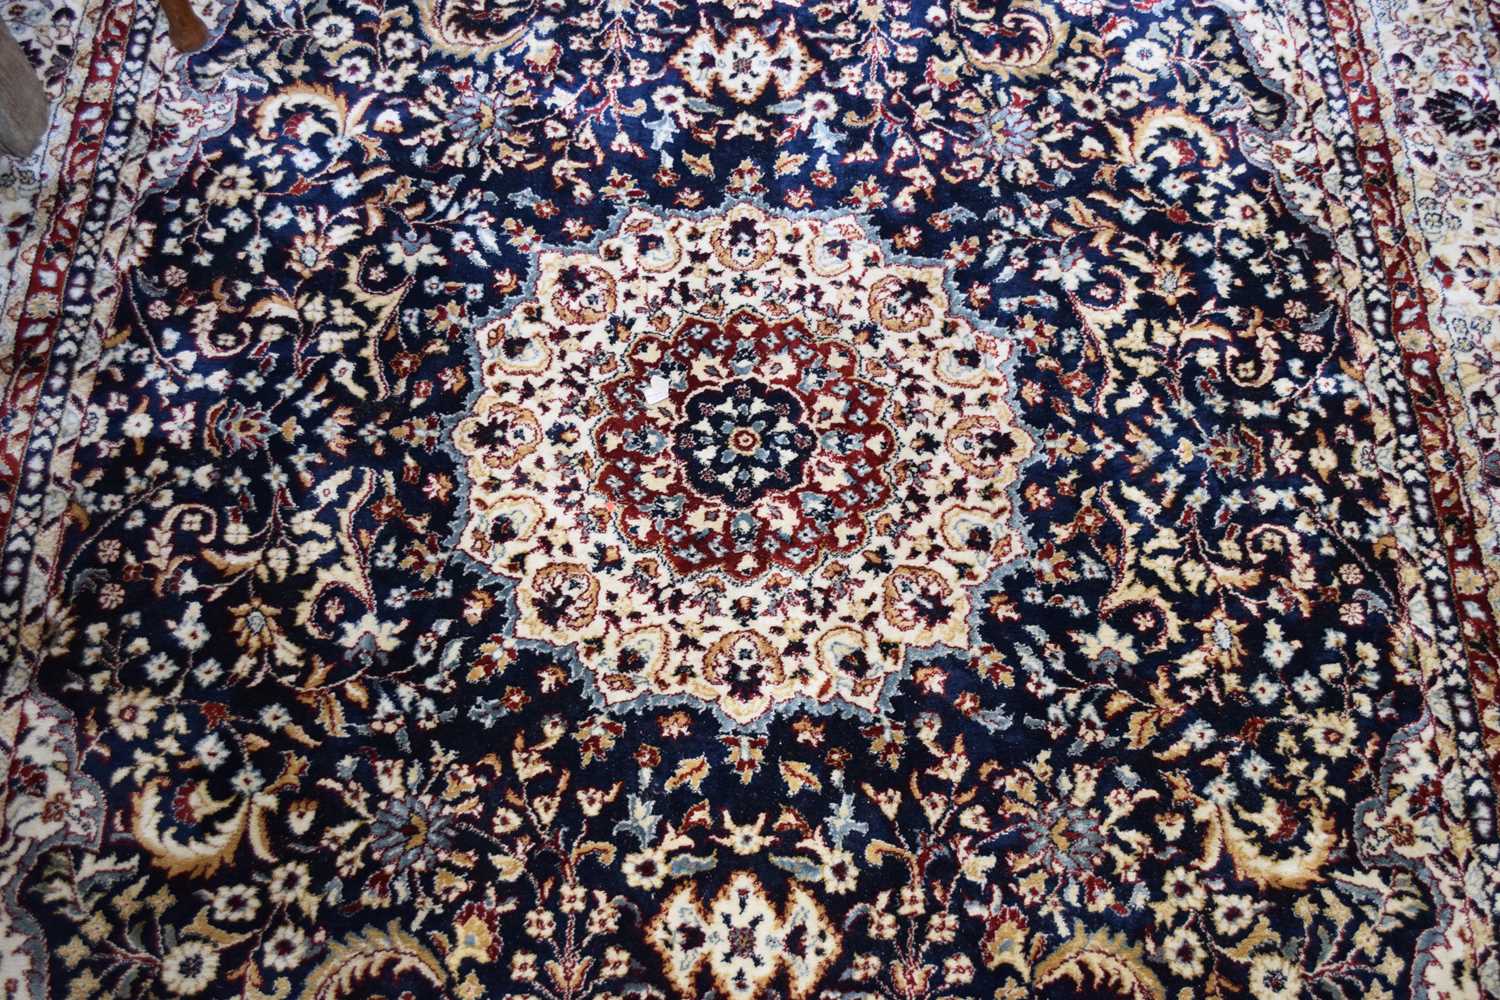 Rich blue ground full pile Turkish Carpet, with floral medallion design 320cm x 200cm approximately - Image 3 of 6